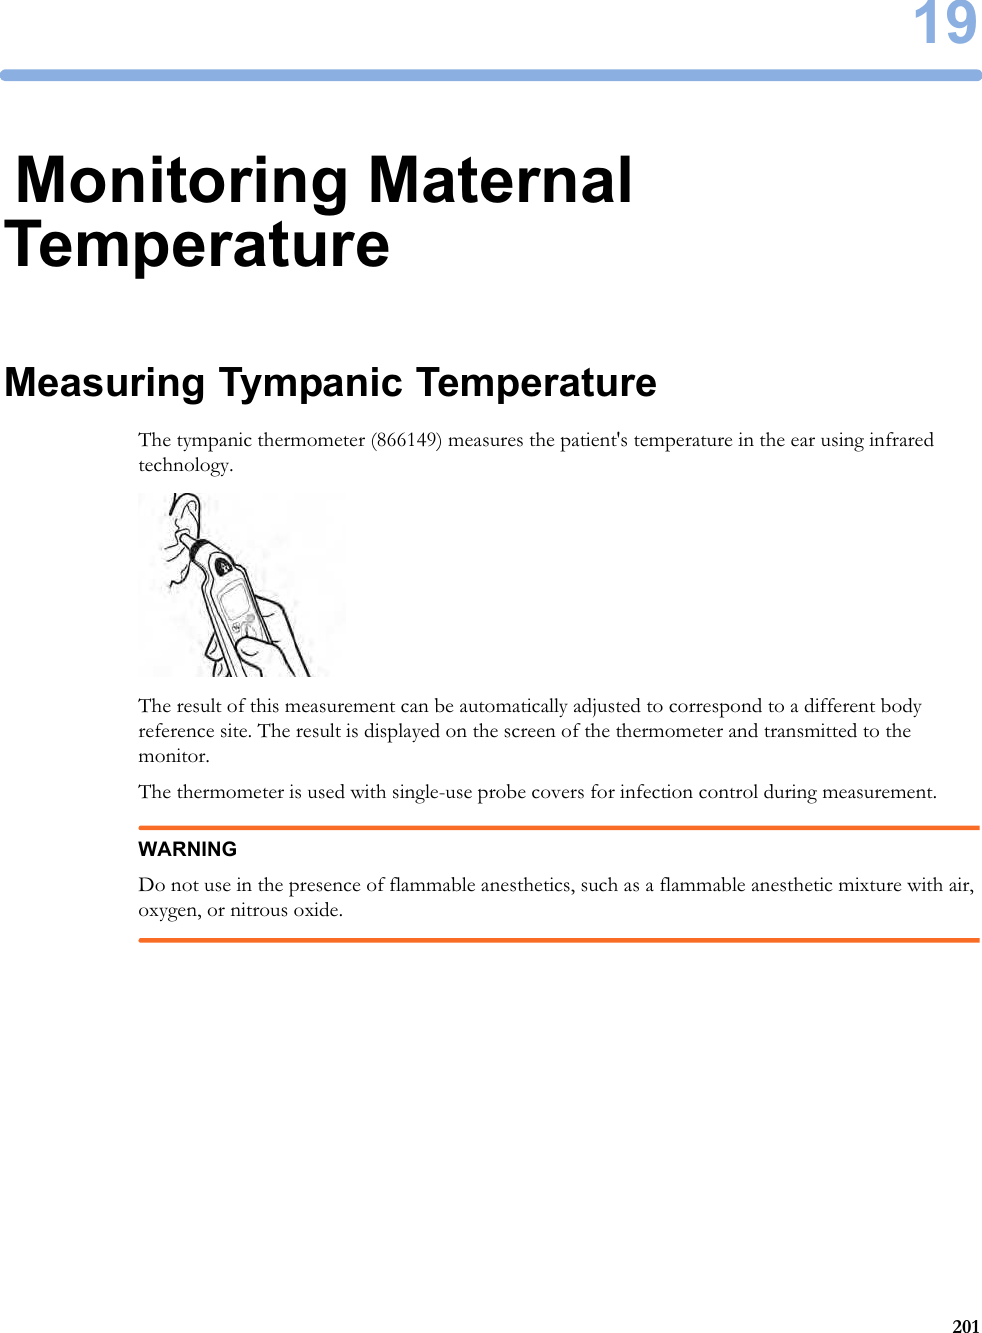 1920119Monitoring Maternal TemperatureMeasuring Tympanic TemperatureThe tympanic thermometer (866149) measures the patient&apos;s temperature in the ear using infrared technology.The result of this measurement can be automatically adjusted to correspond to a different body reference site. The result is displayed on the screen of the thermometer and transmitted to the monitor.The thermometer is used with single-use probe covers for infection control during measurement.WARNINGDo not use in the presence of flammable anesthetics, such as a flammable anesthetic mixture with air, oxygen, or nitrous oxide.